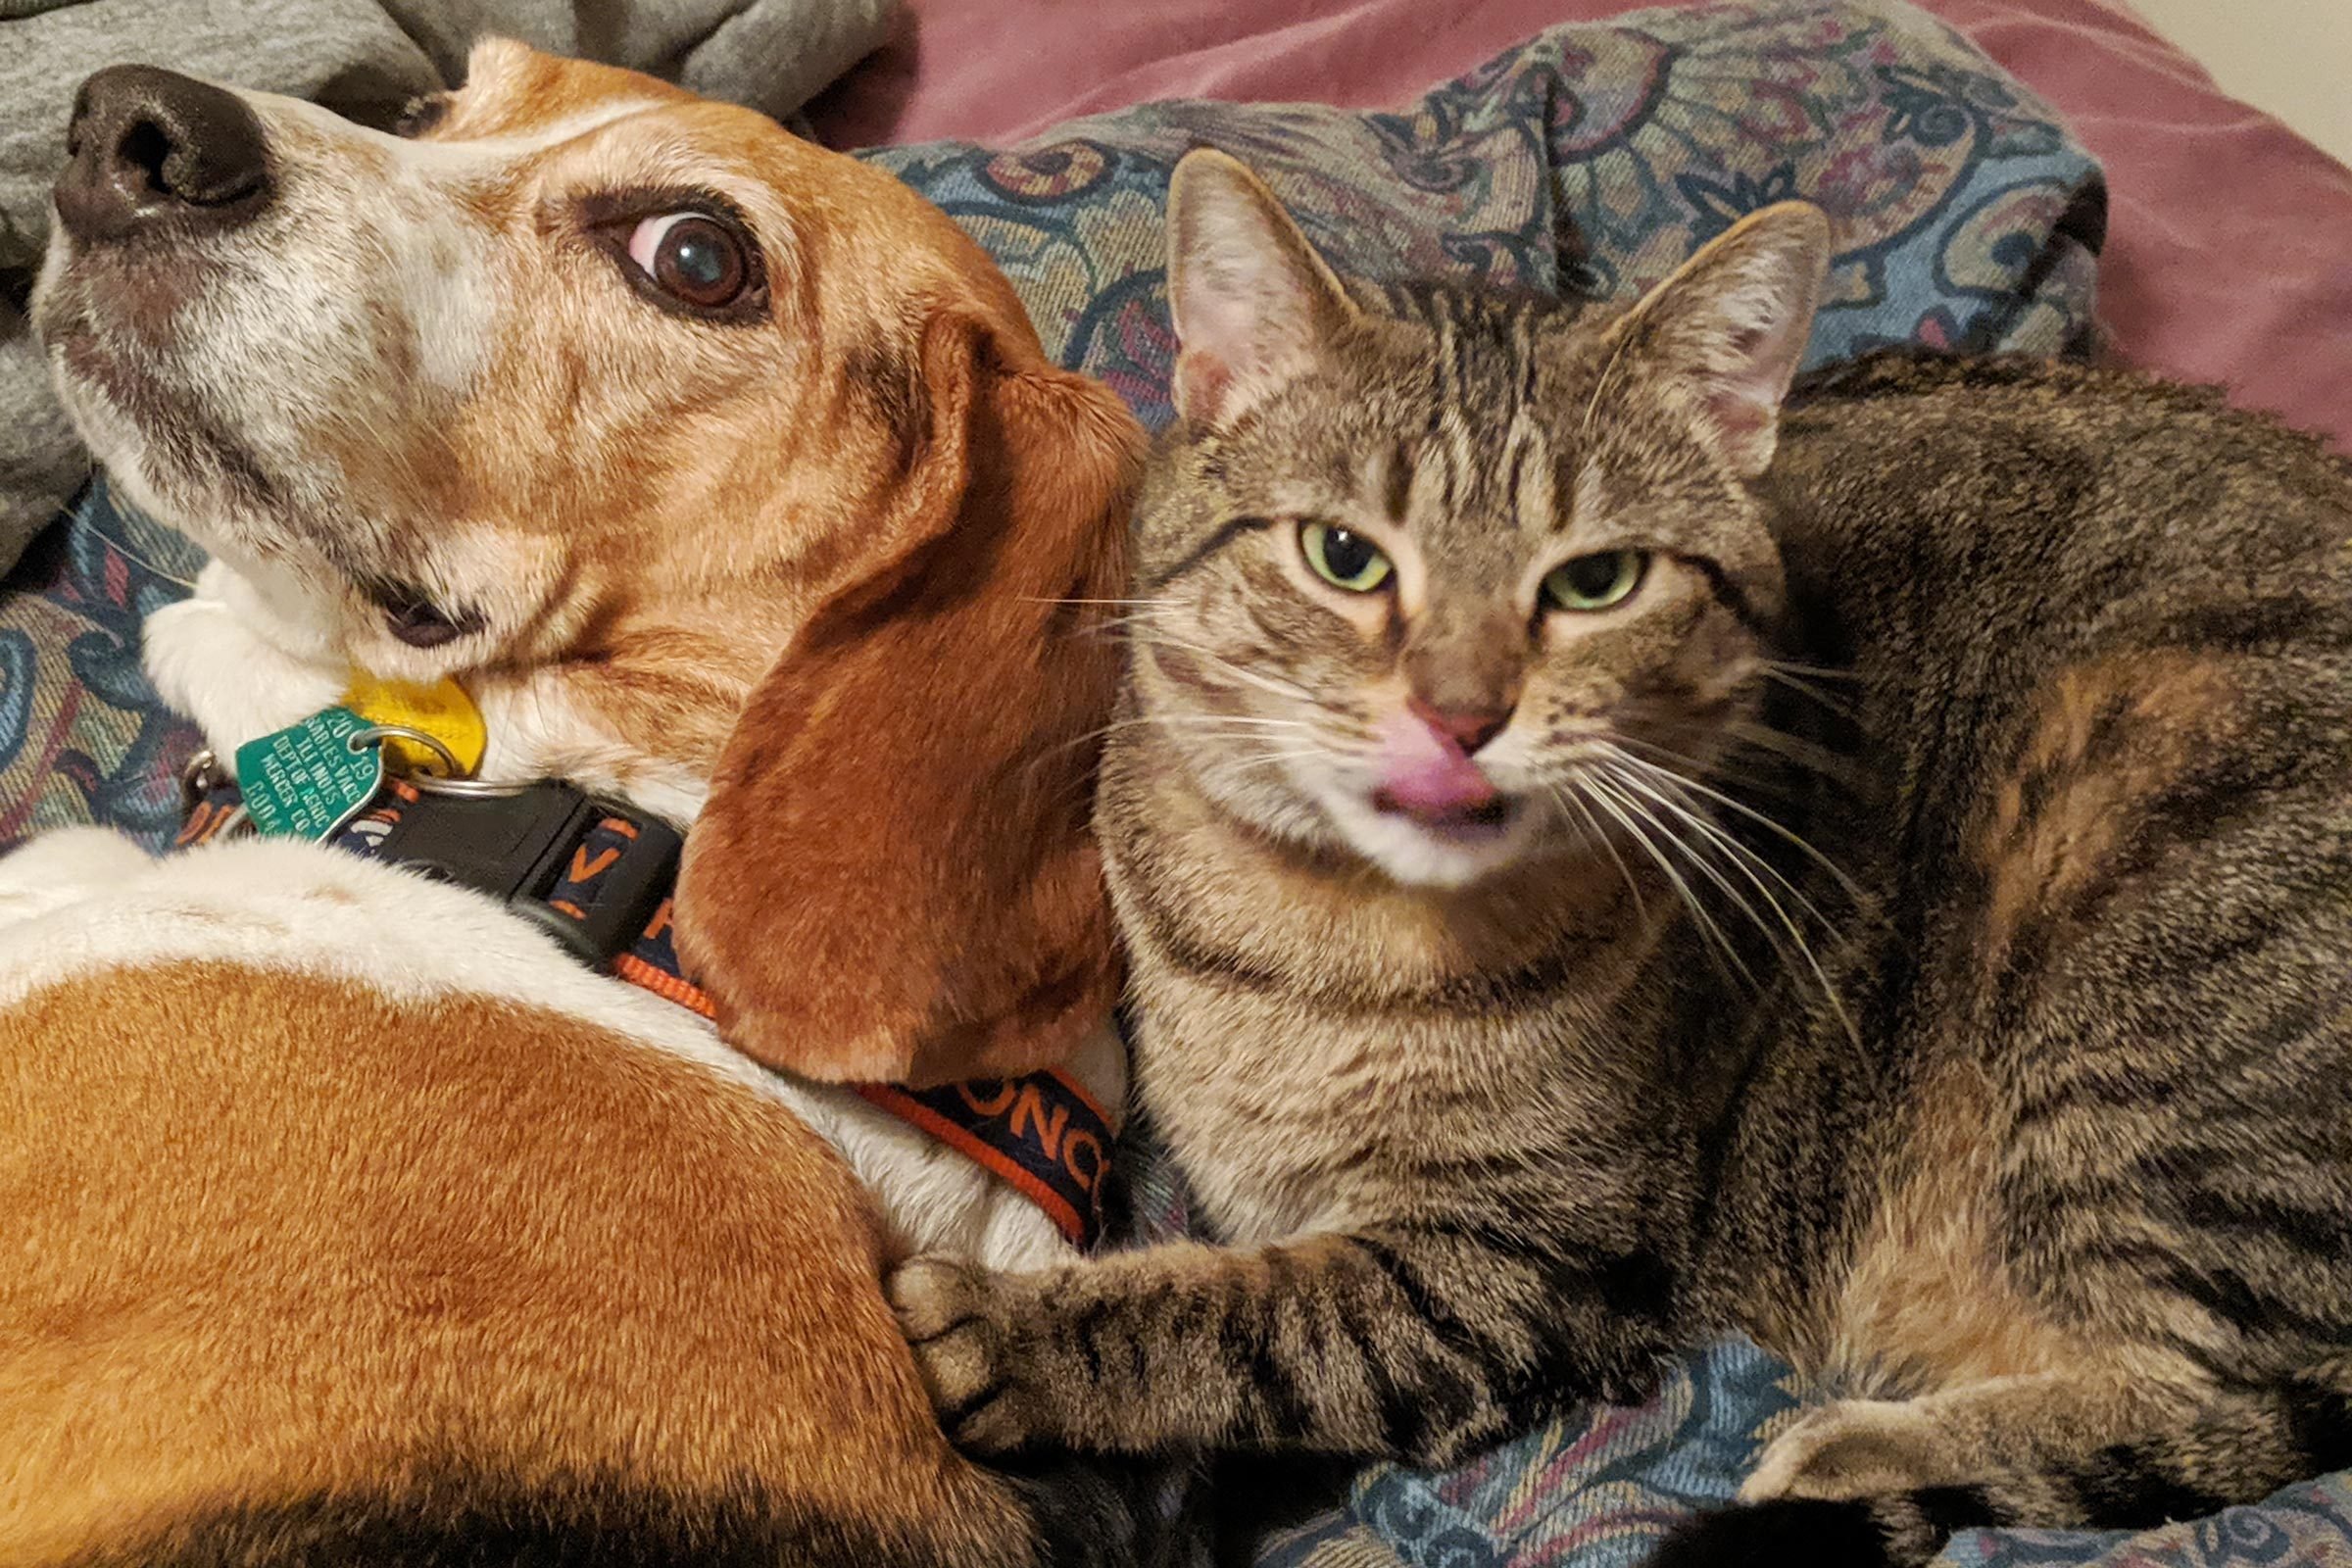 dog and cat sitting together, both looking at the camera